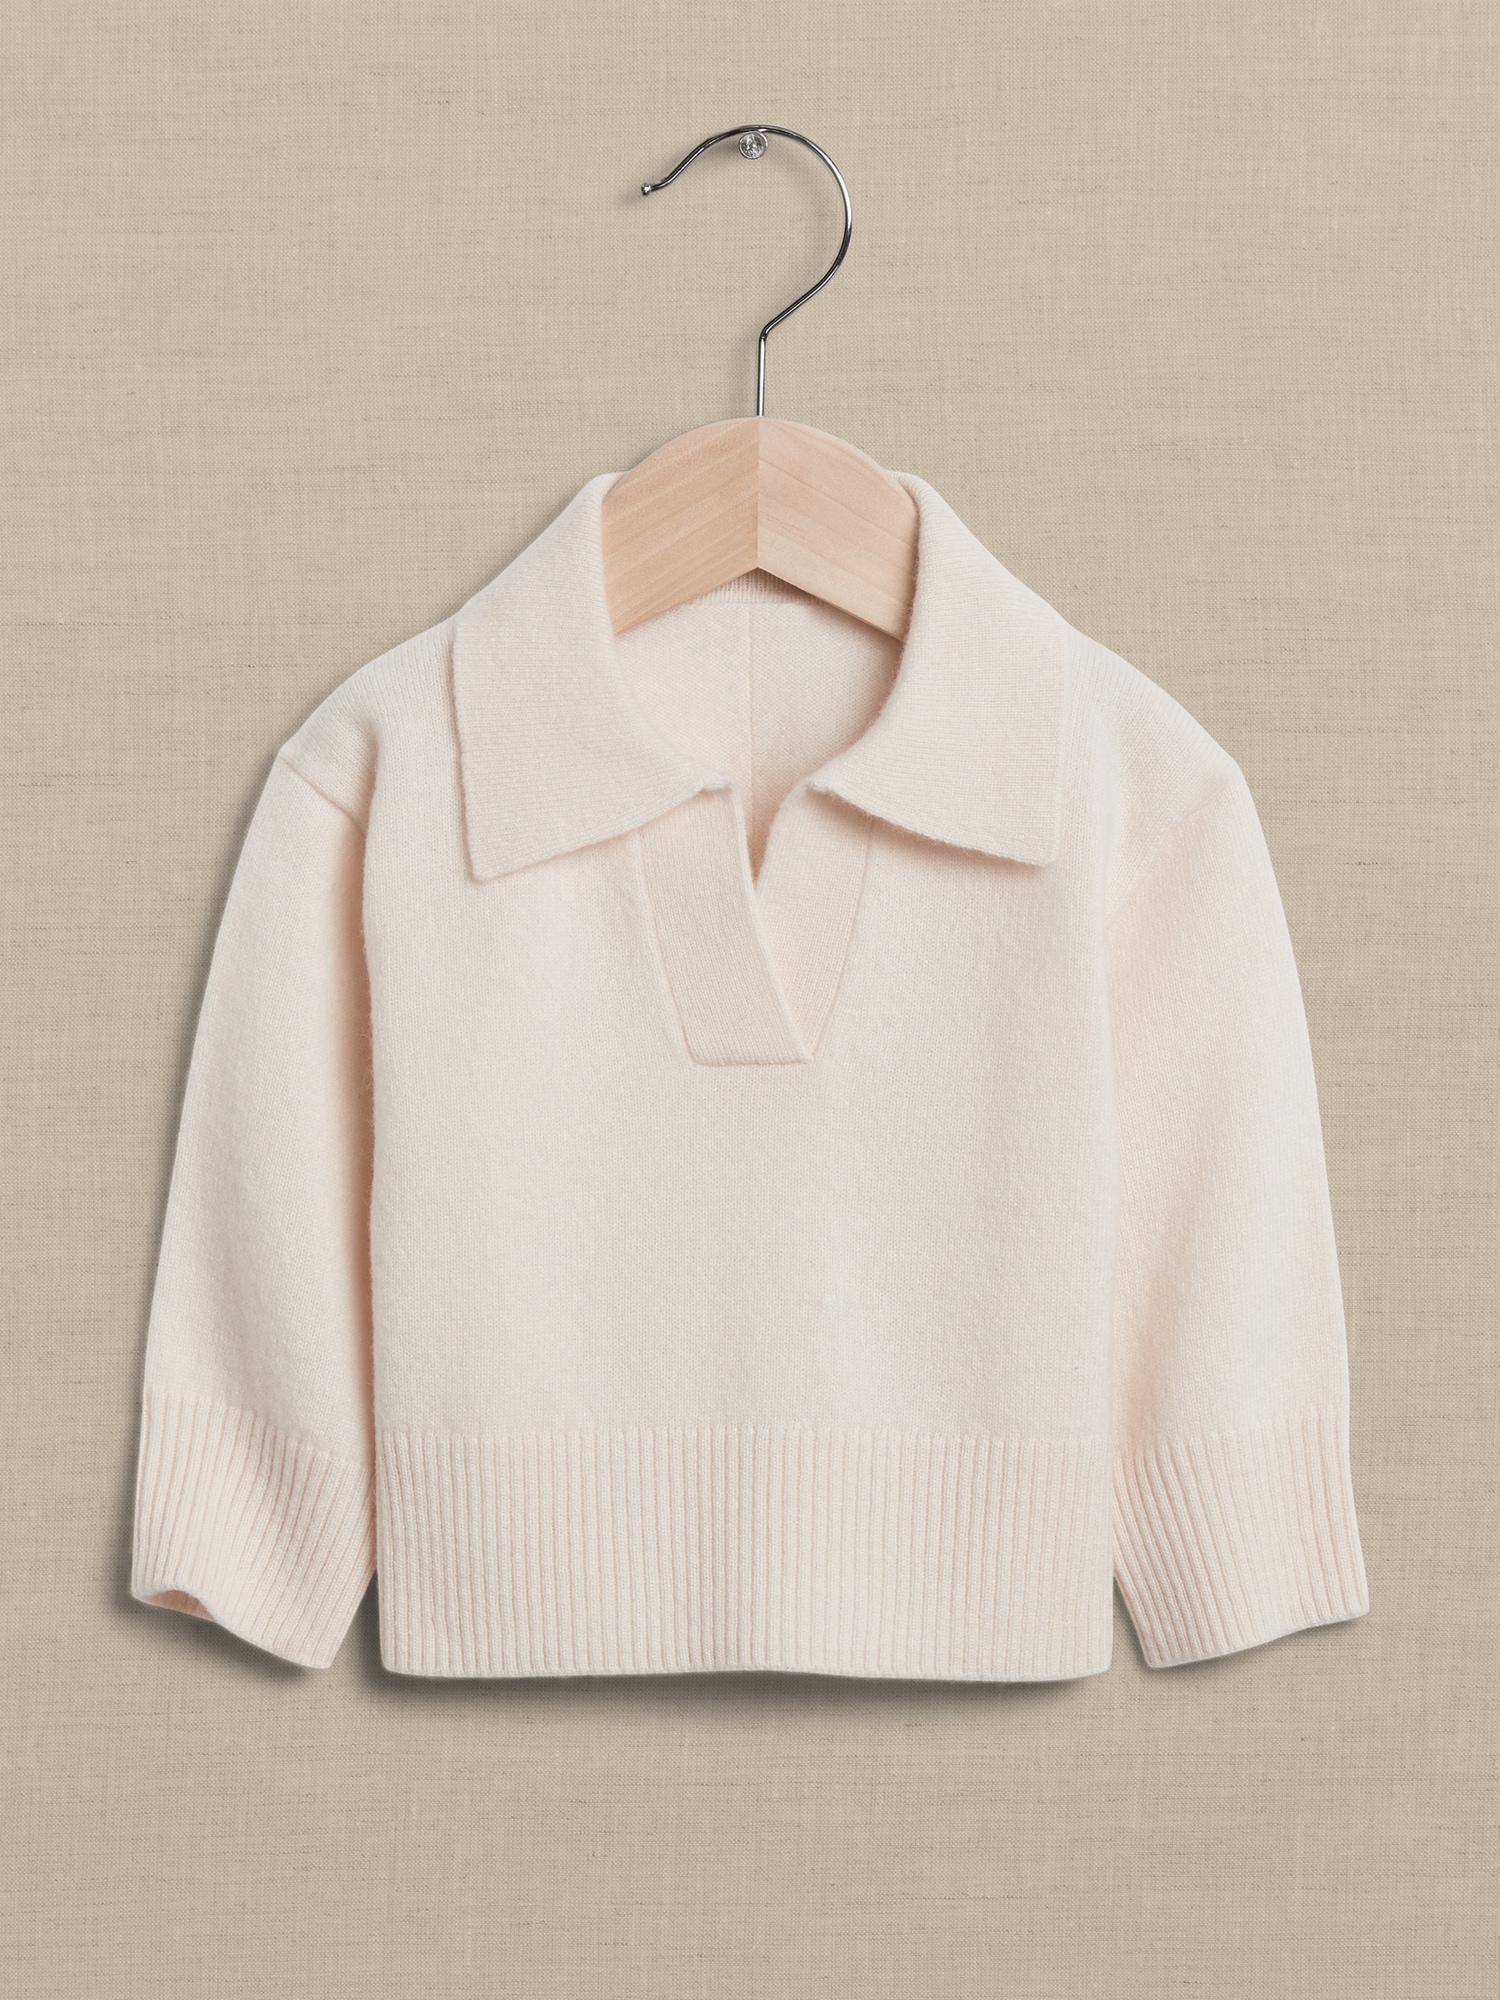 Bananarepublic Luna Cashmere Sweater Polo for Baby + Toddler